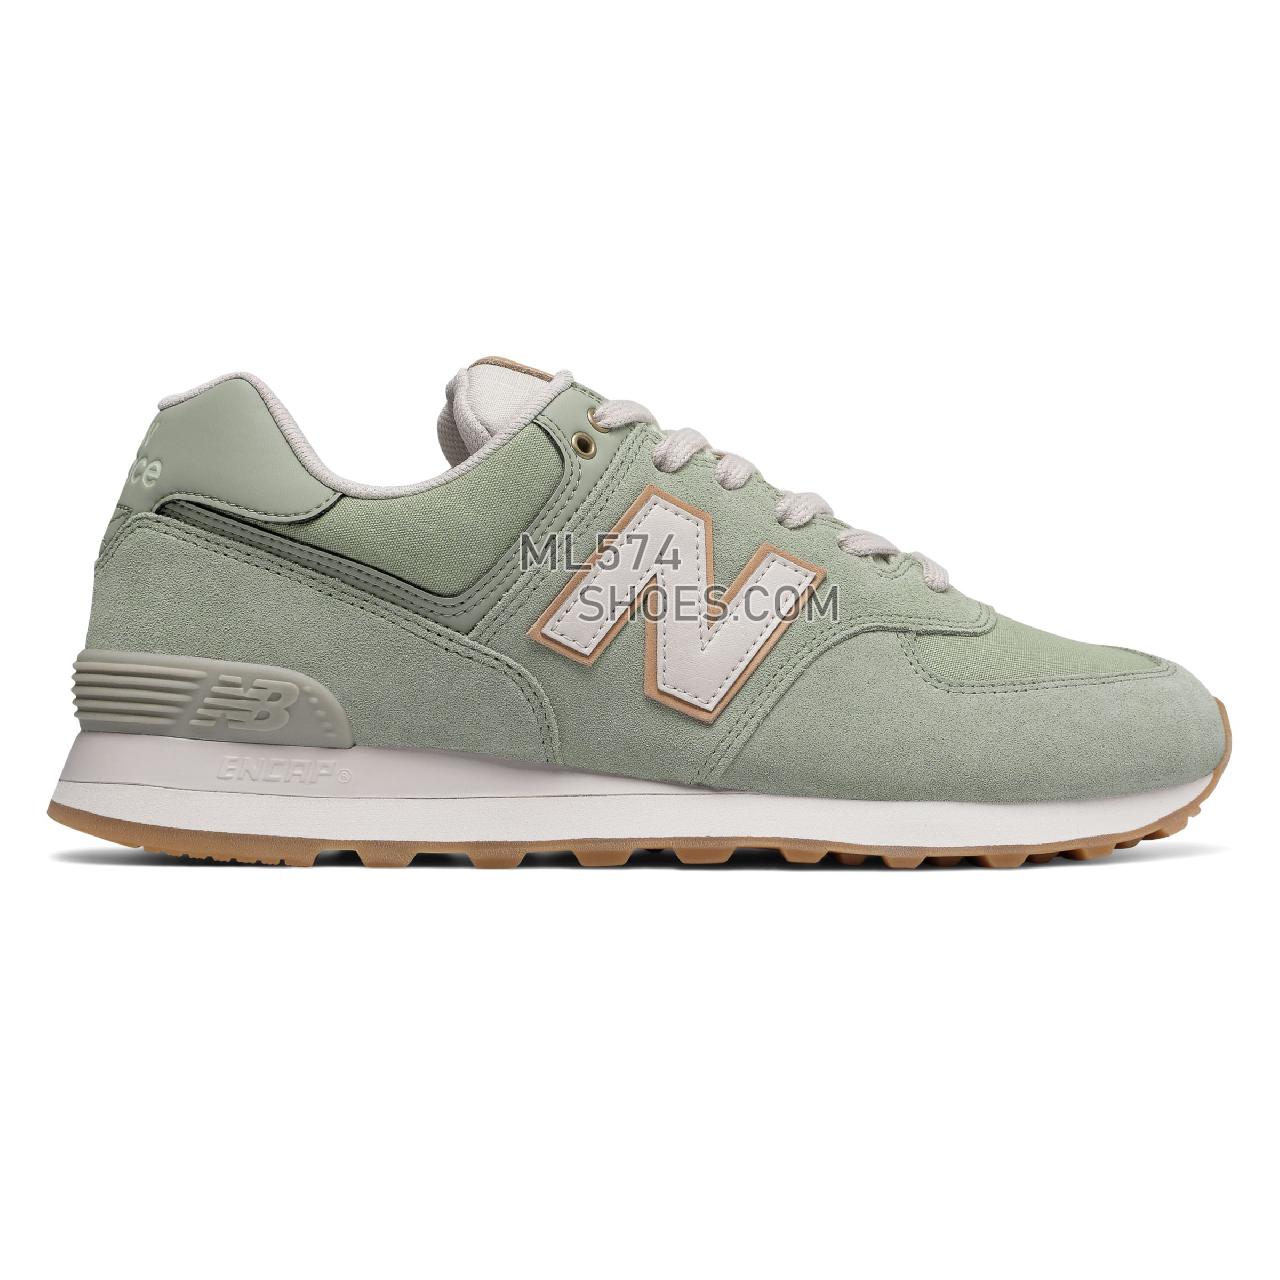 New Balance 574 Natural Outdoor - Men's 574 - Classic Silver Mint with Moonbeam - ML574OUC